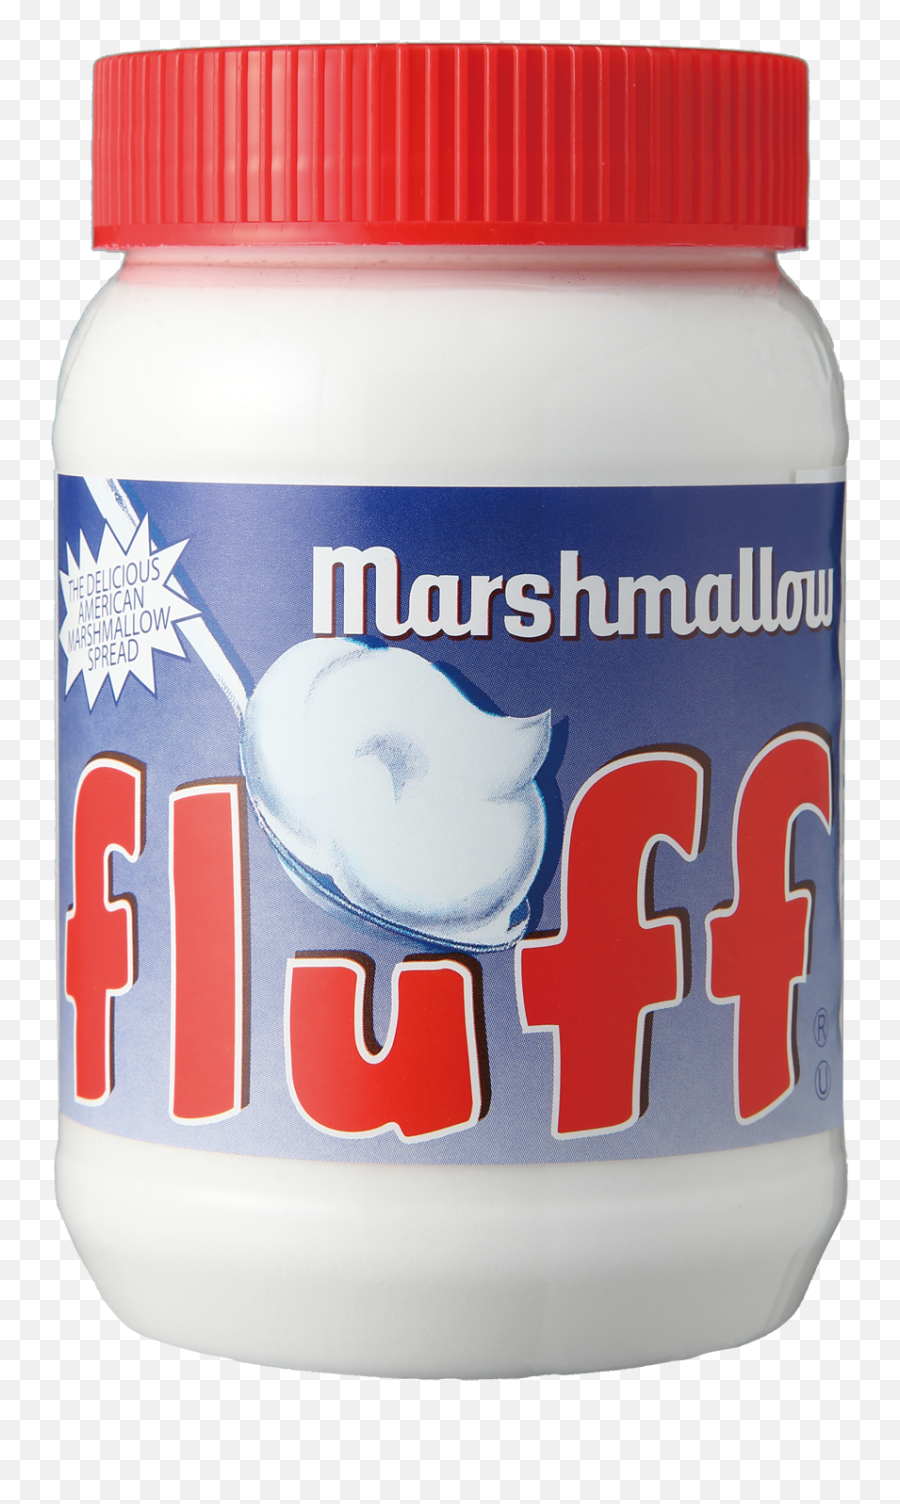 Marshmallow Fluff Transparent Background Png